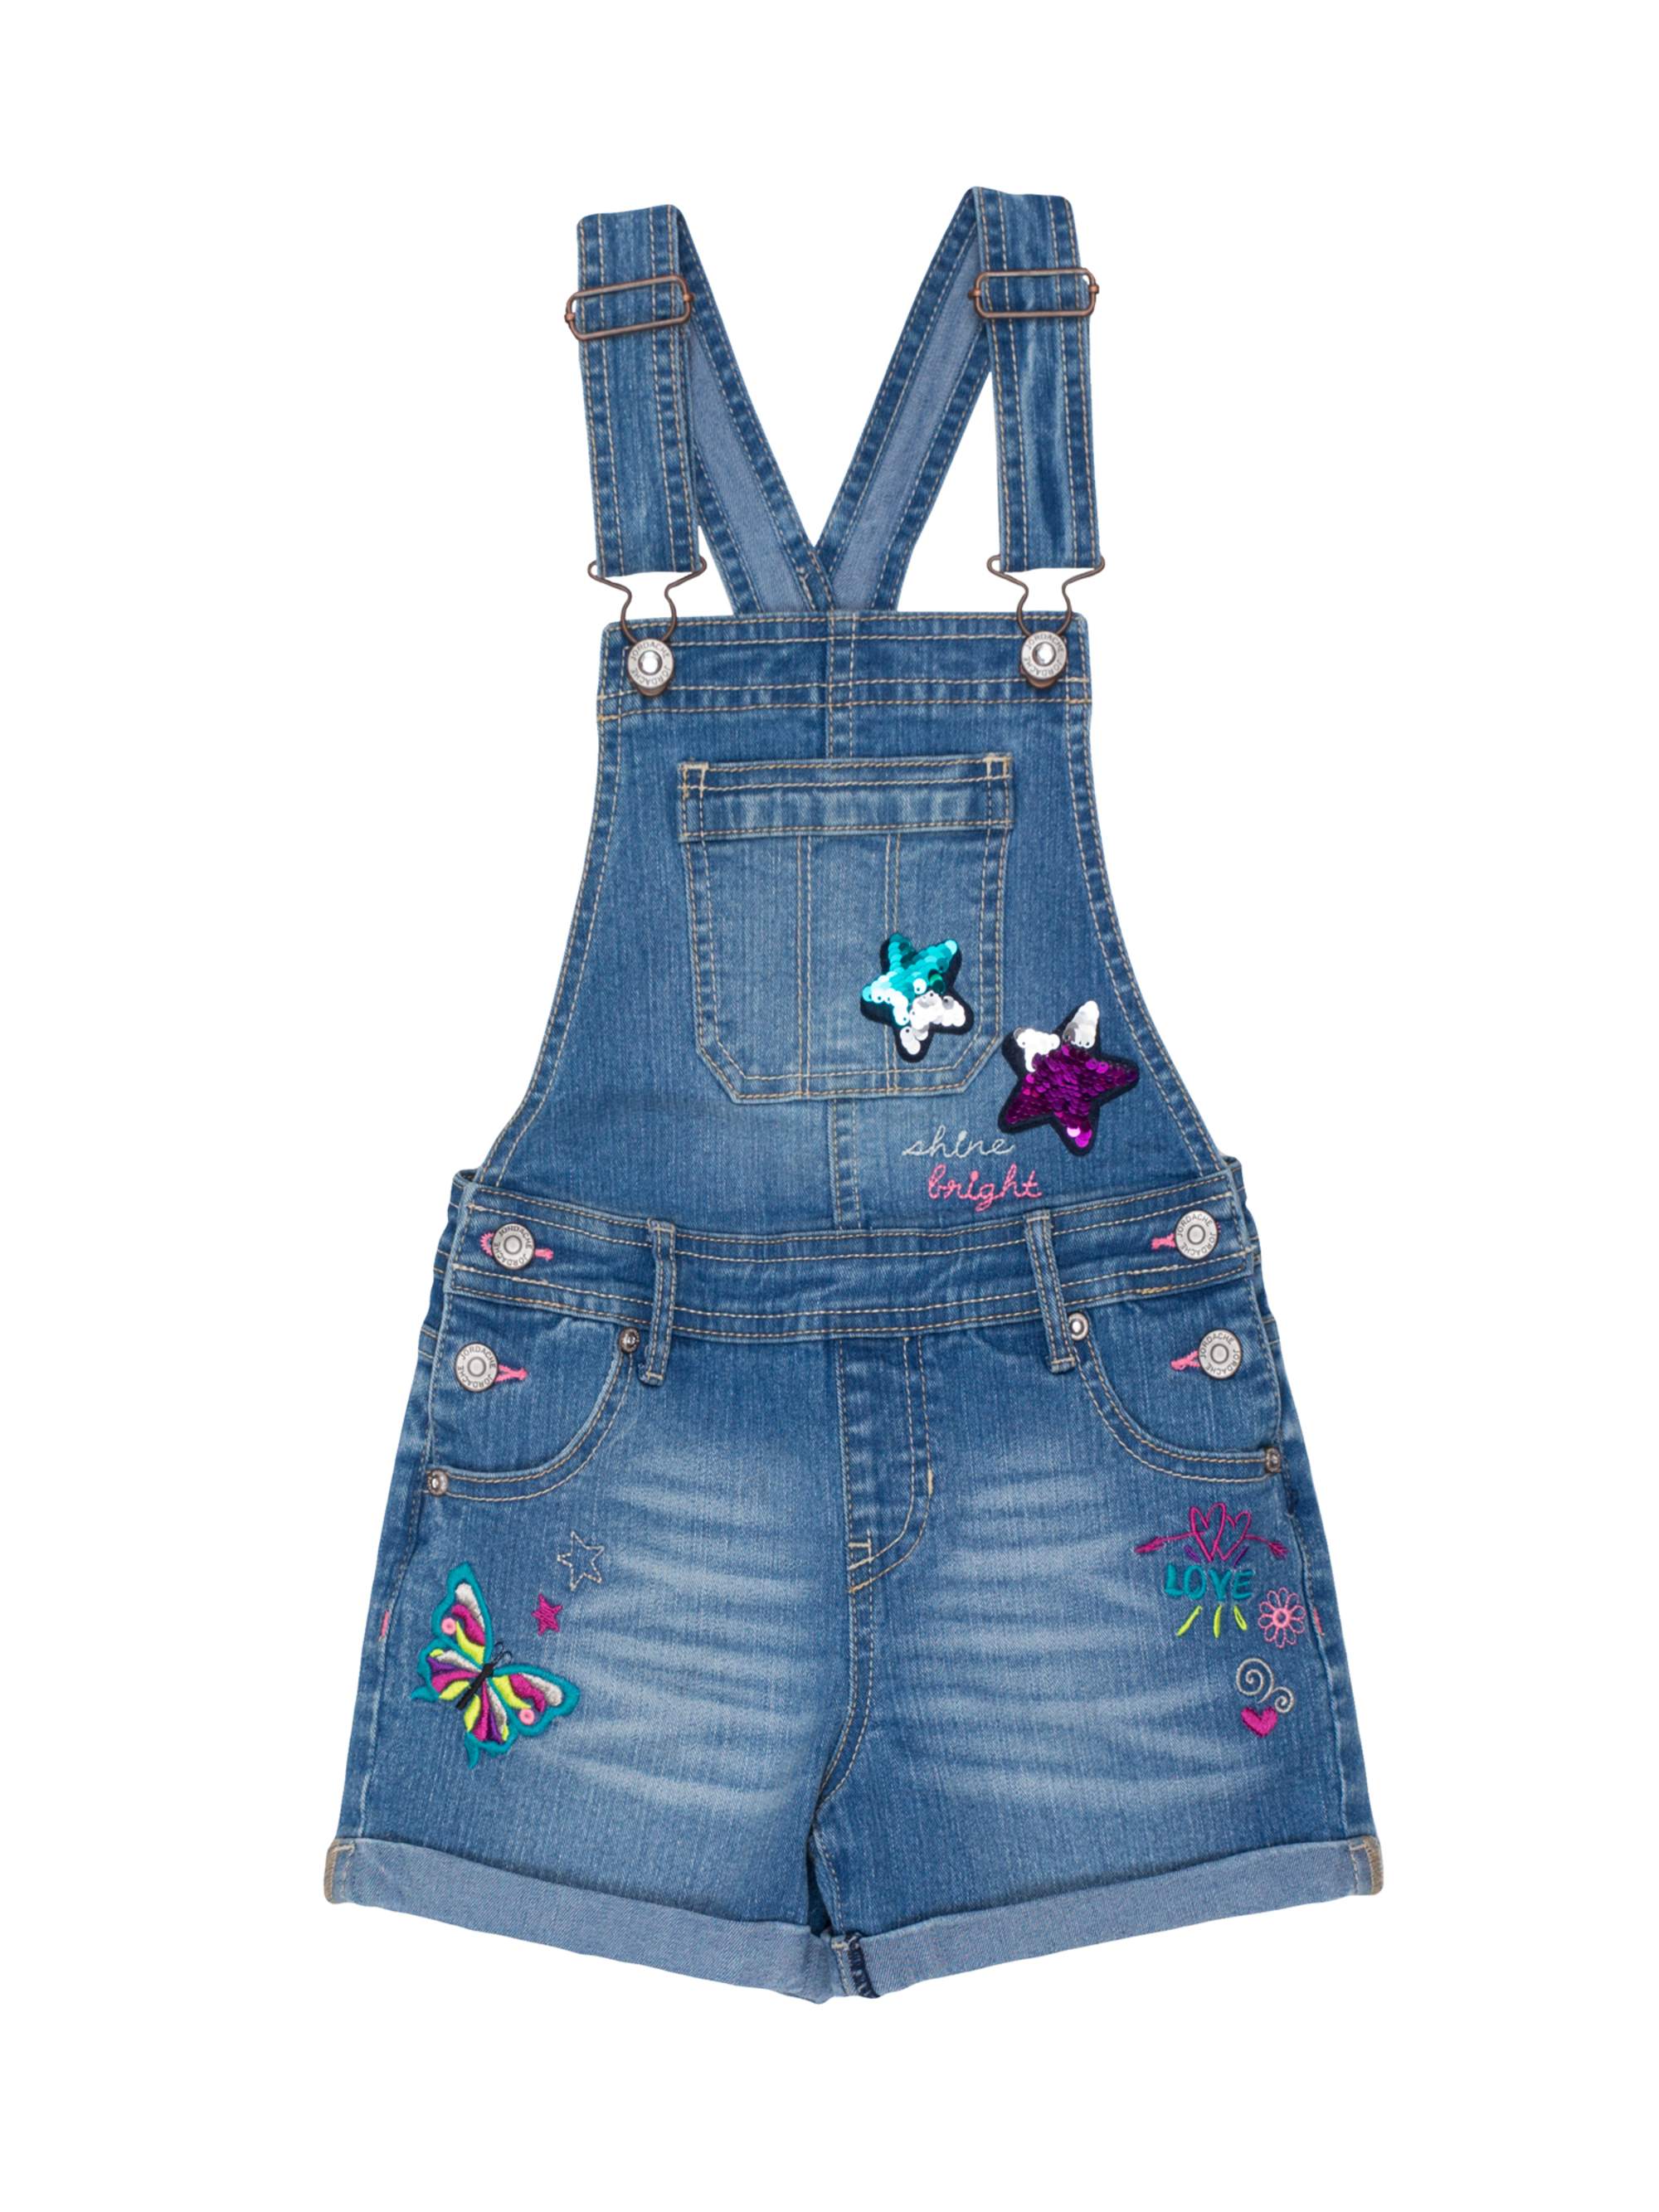 Jordache Rolled Cuff Embellished Overall Short (Little Girls & Big Girls) - image 1 of 2